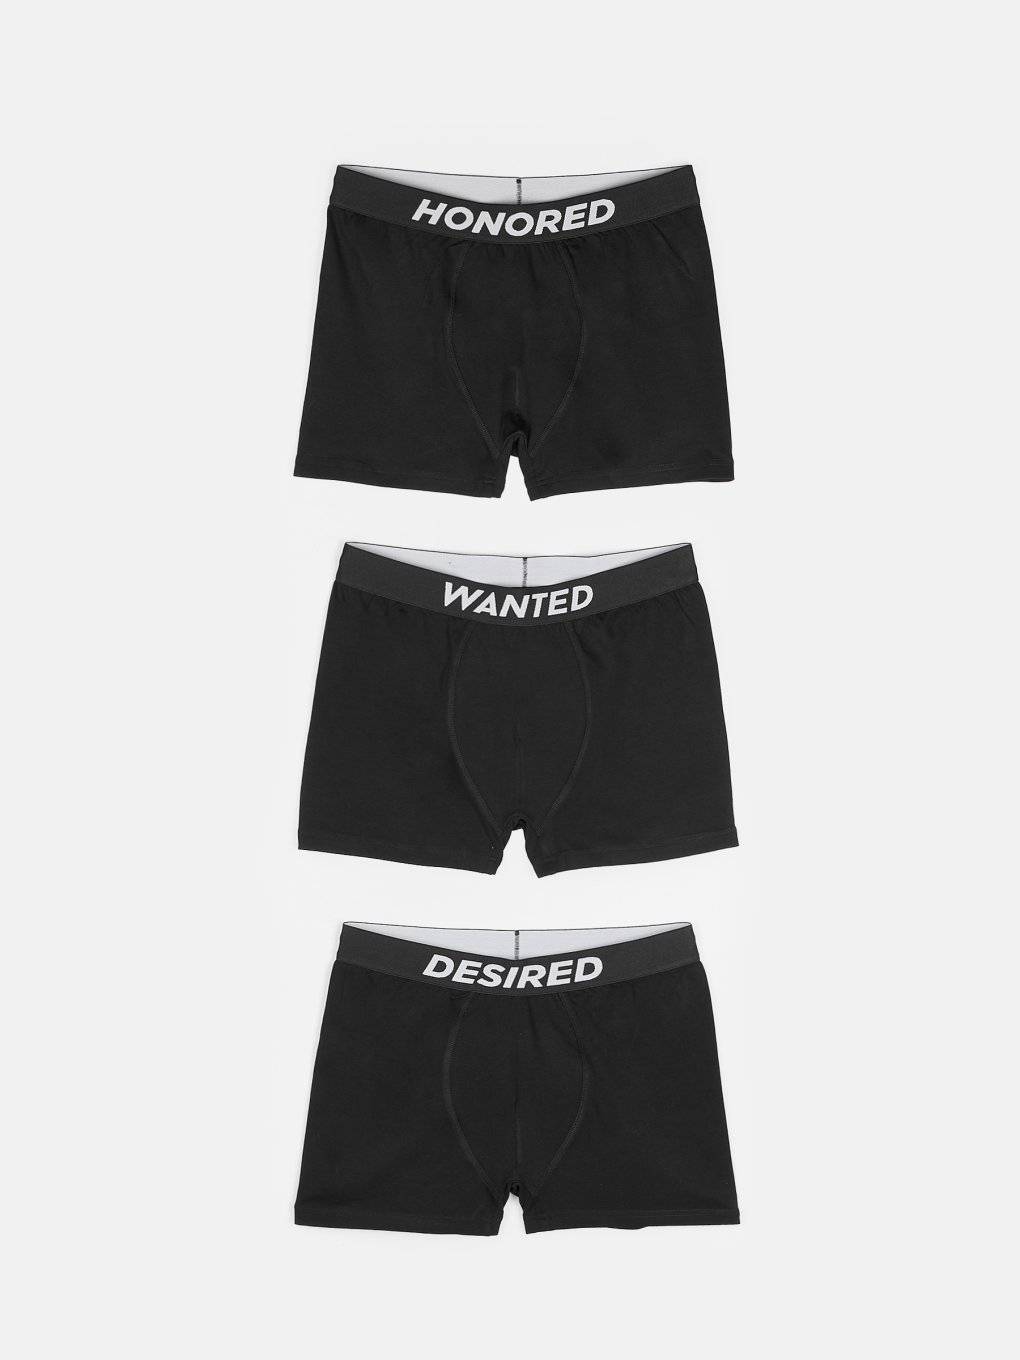 Boxers 3 pack